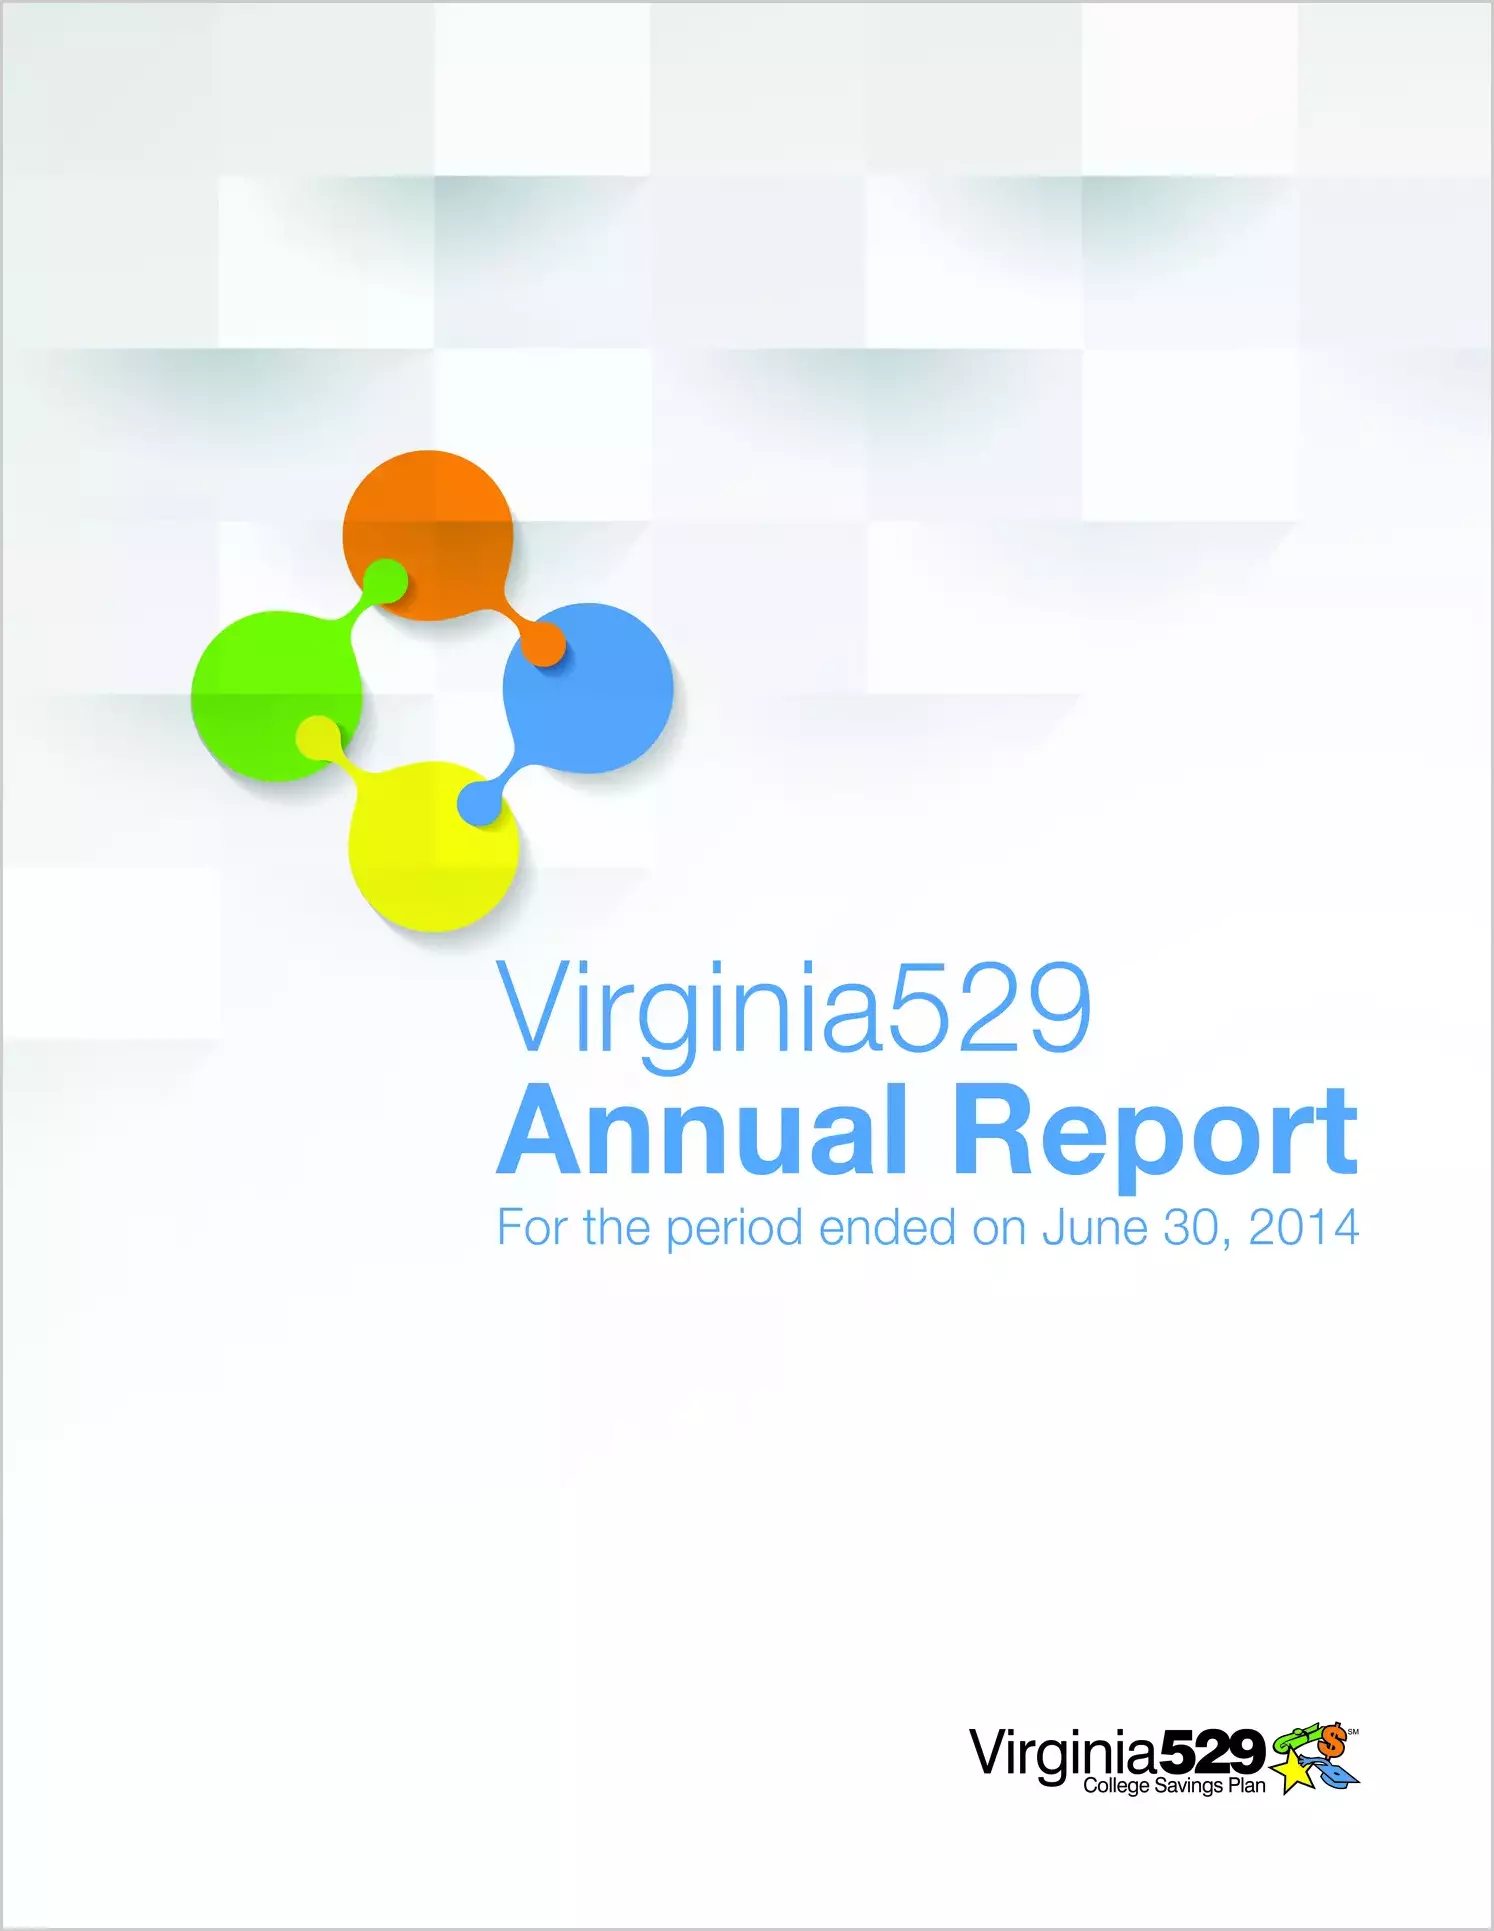 Virginia College Savings Plan Financial Statements for the year ended June 30, 2014